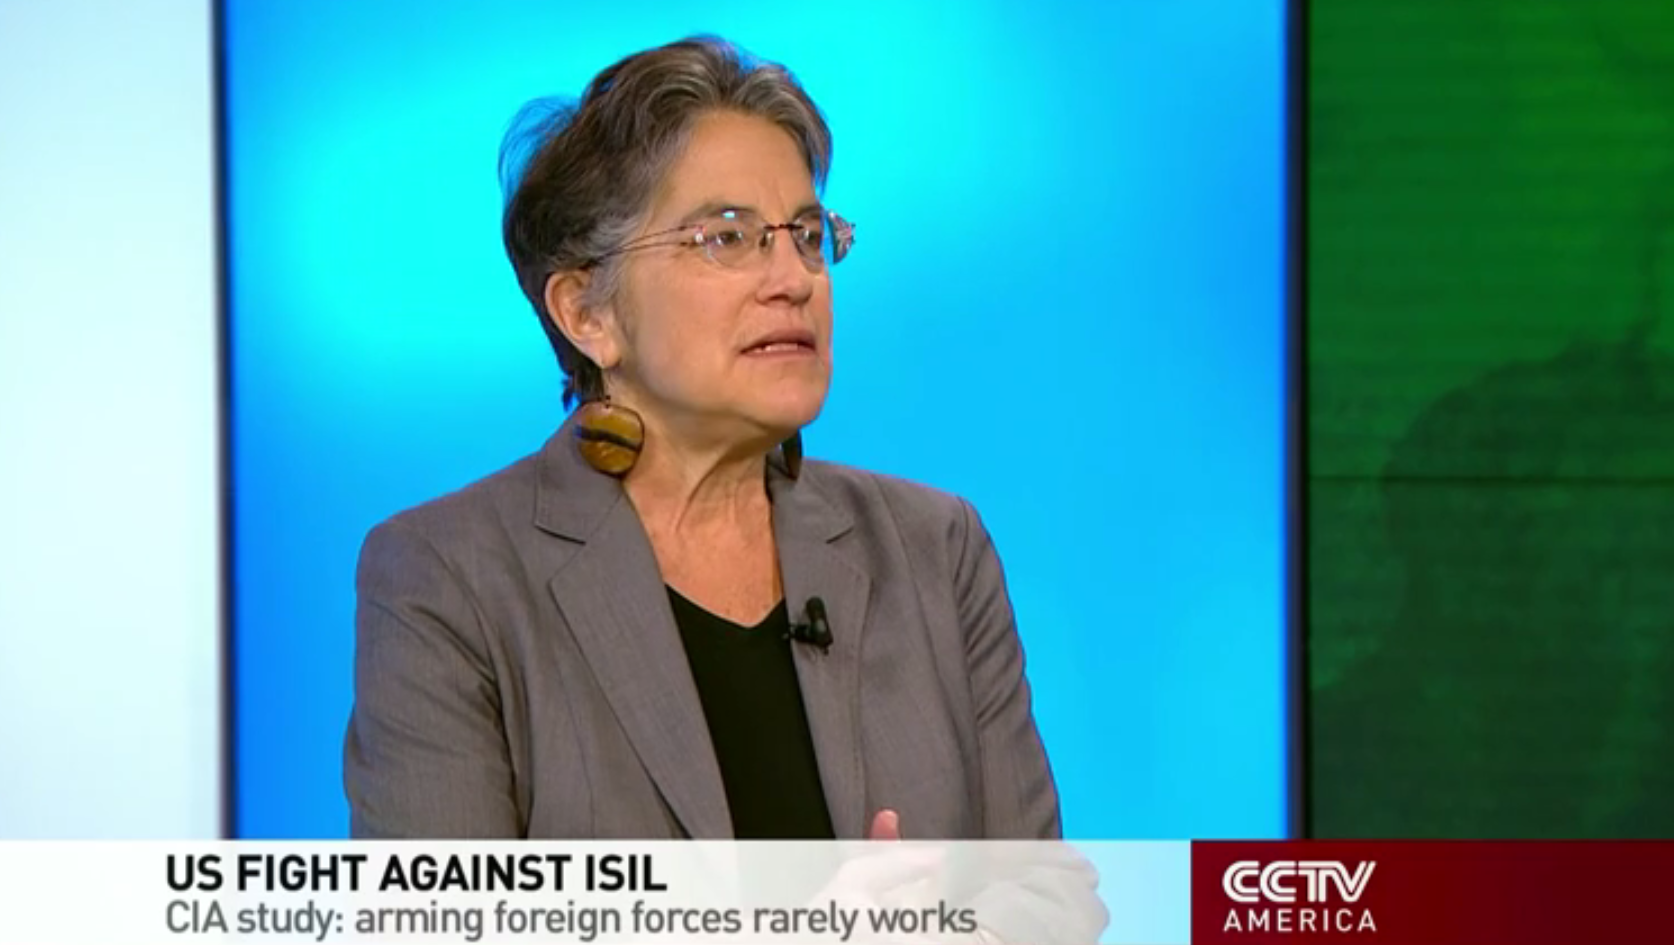 Phyllis Bennis on CCTV discussing the CIA's new report.